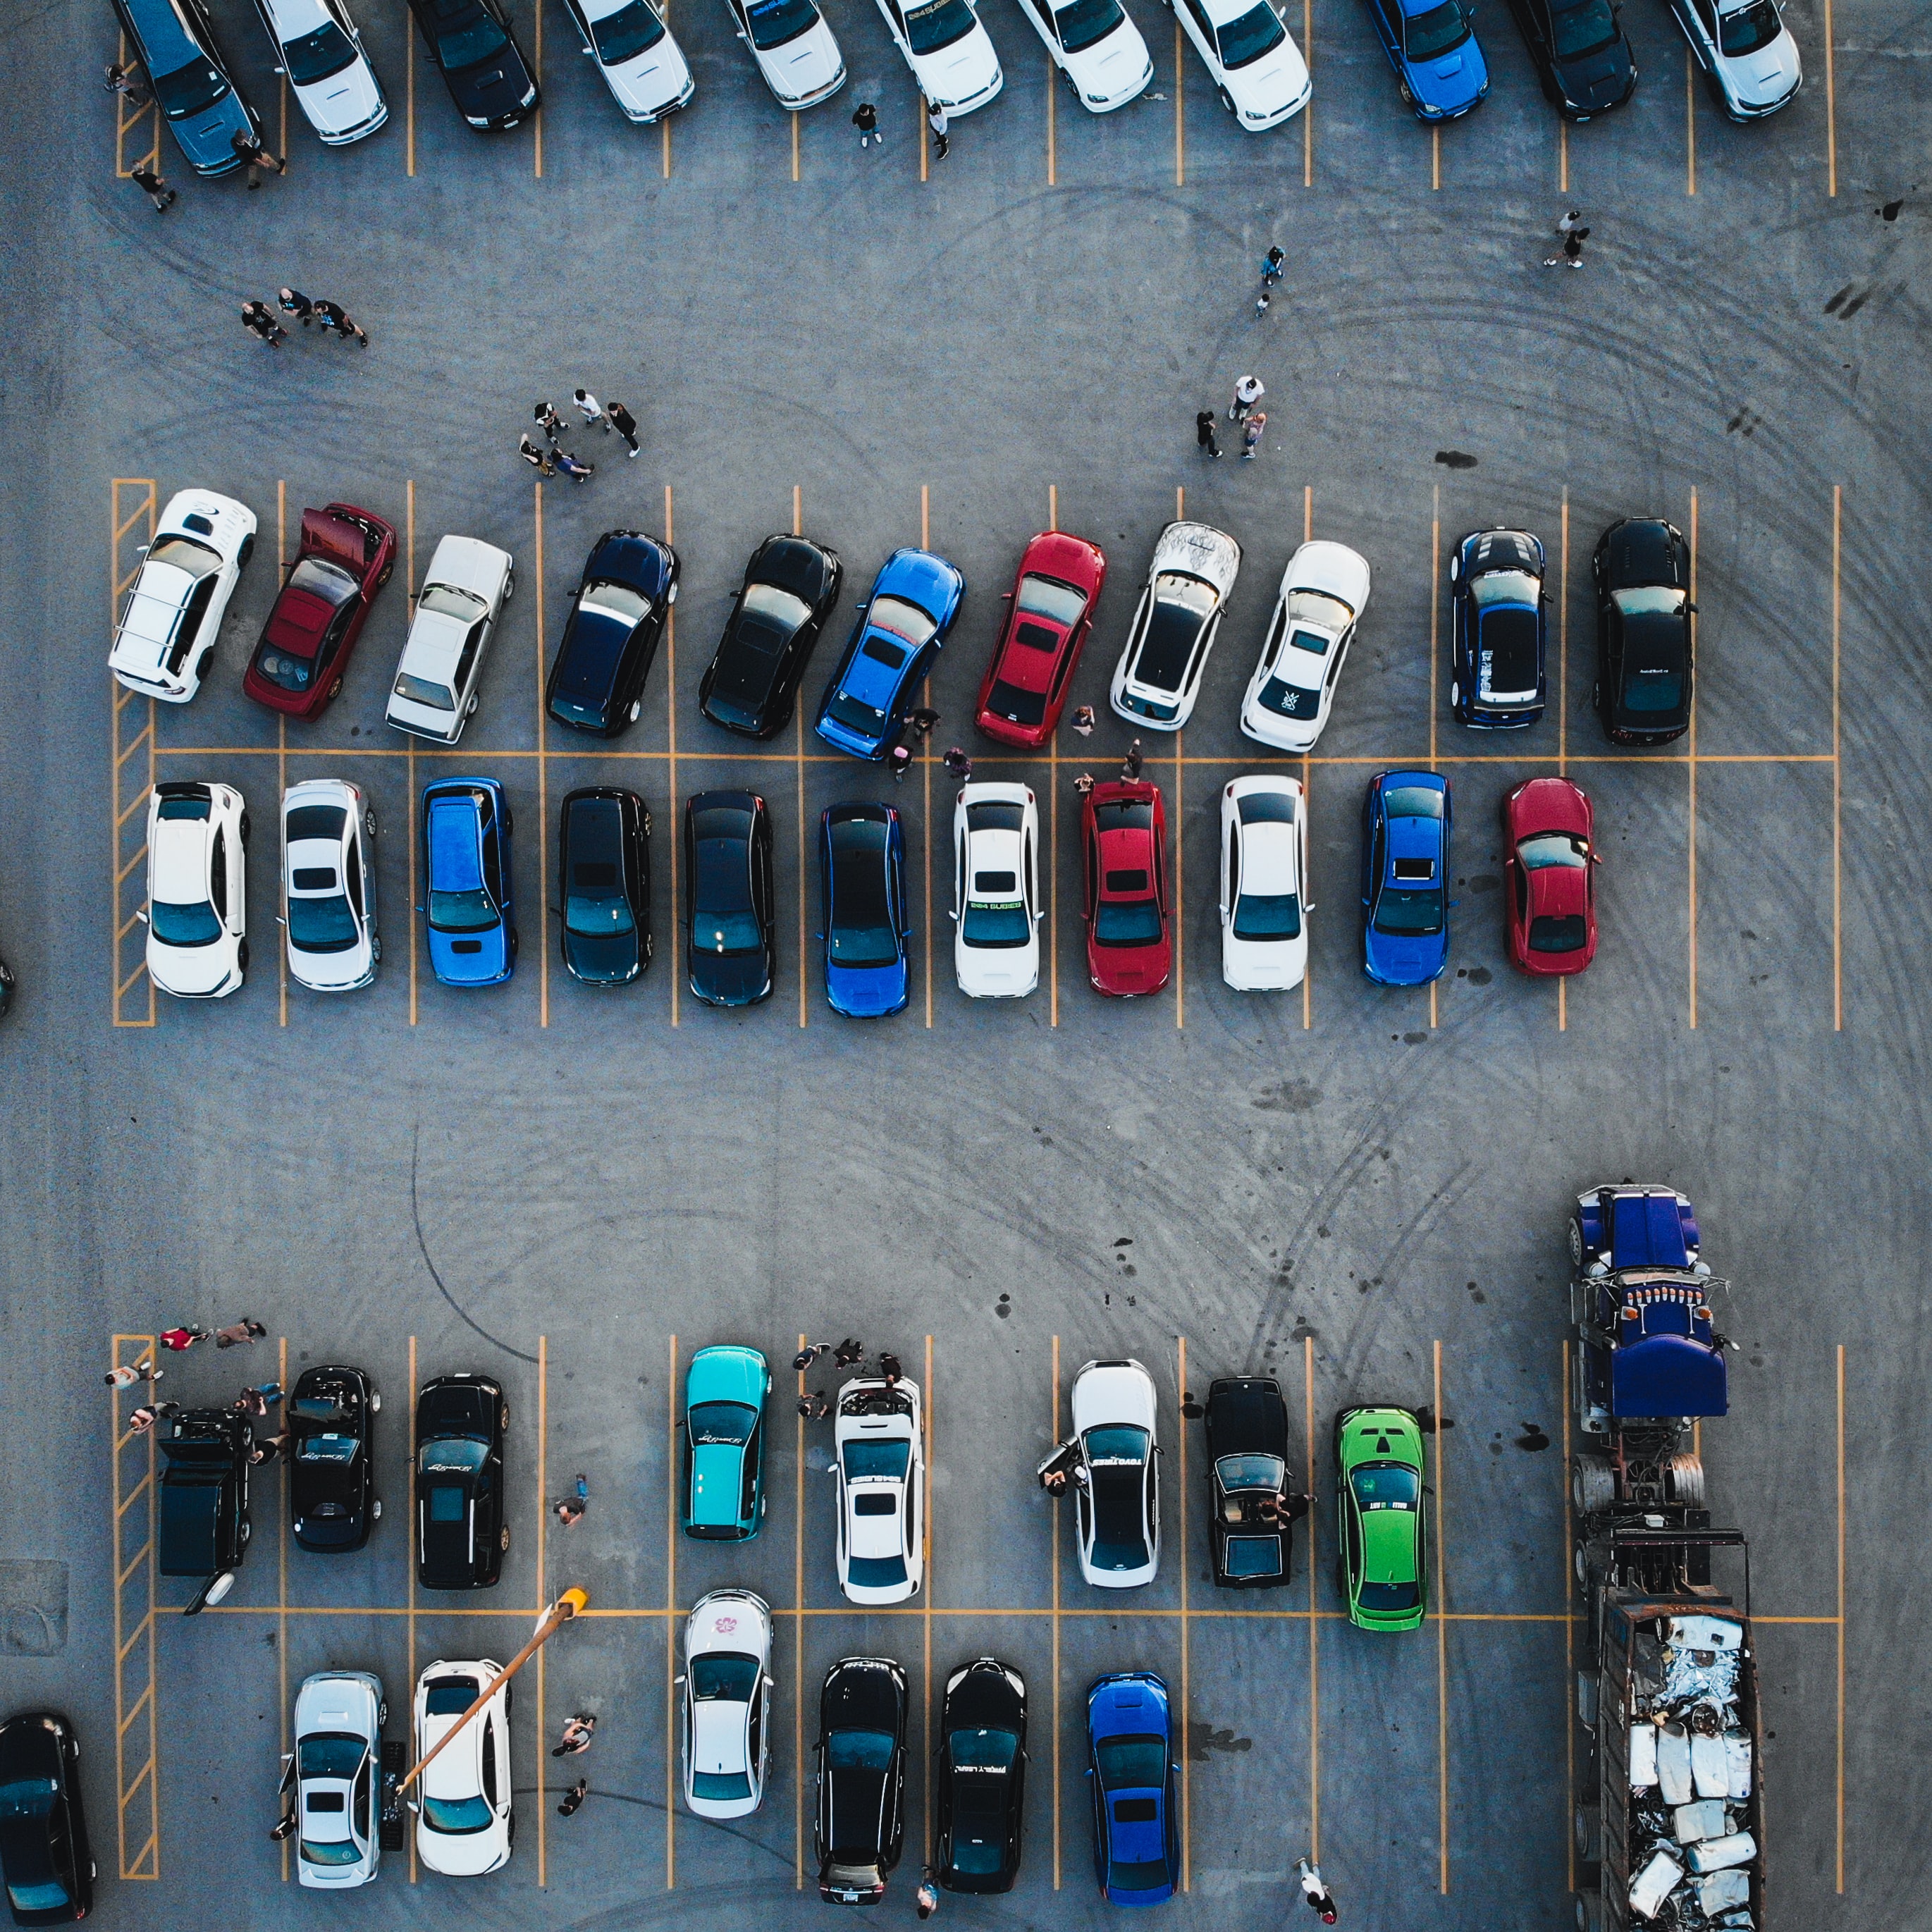 Cars parked in a parking lot